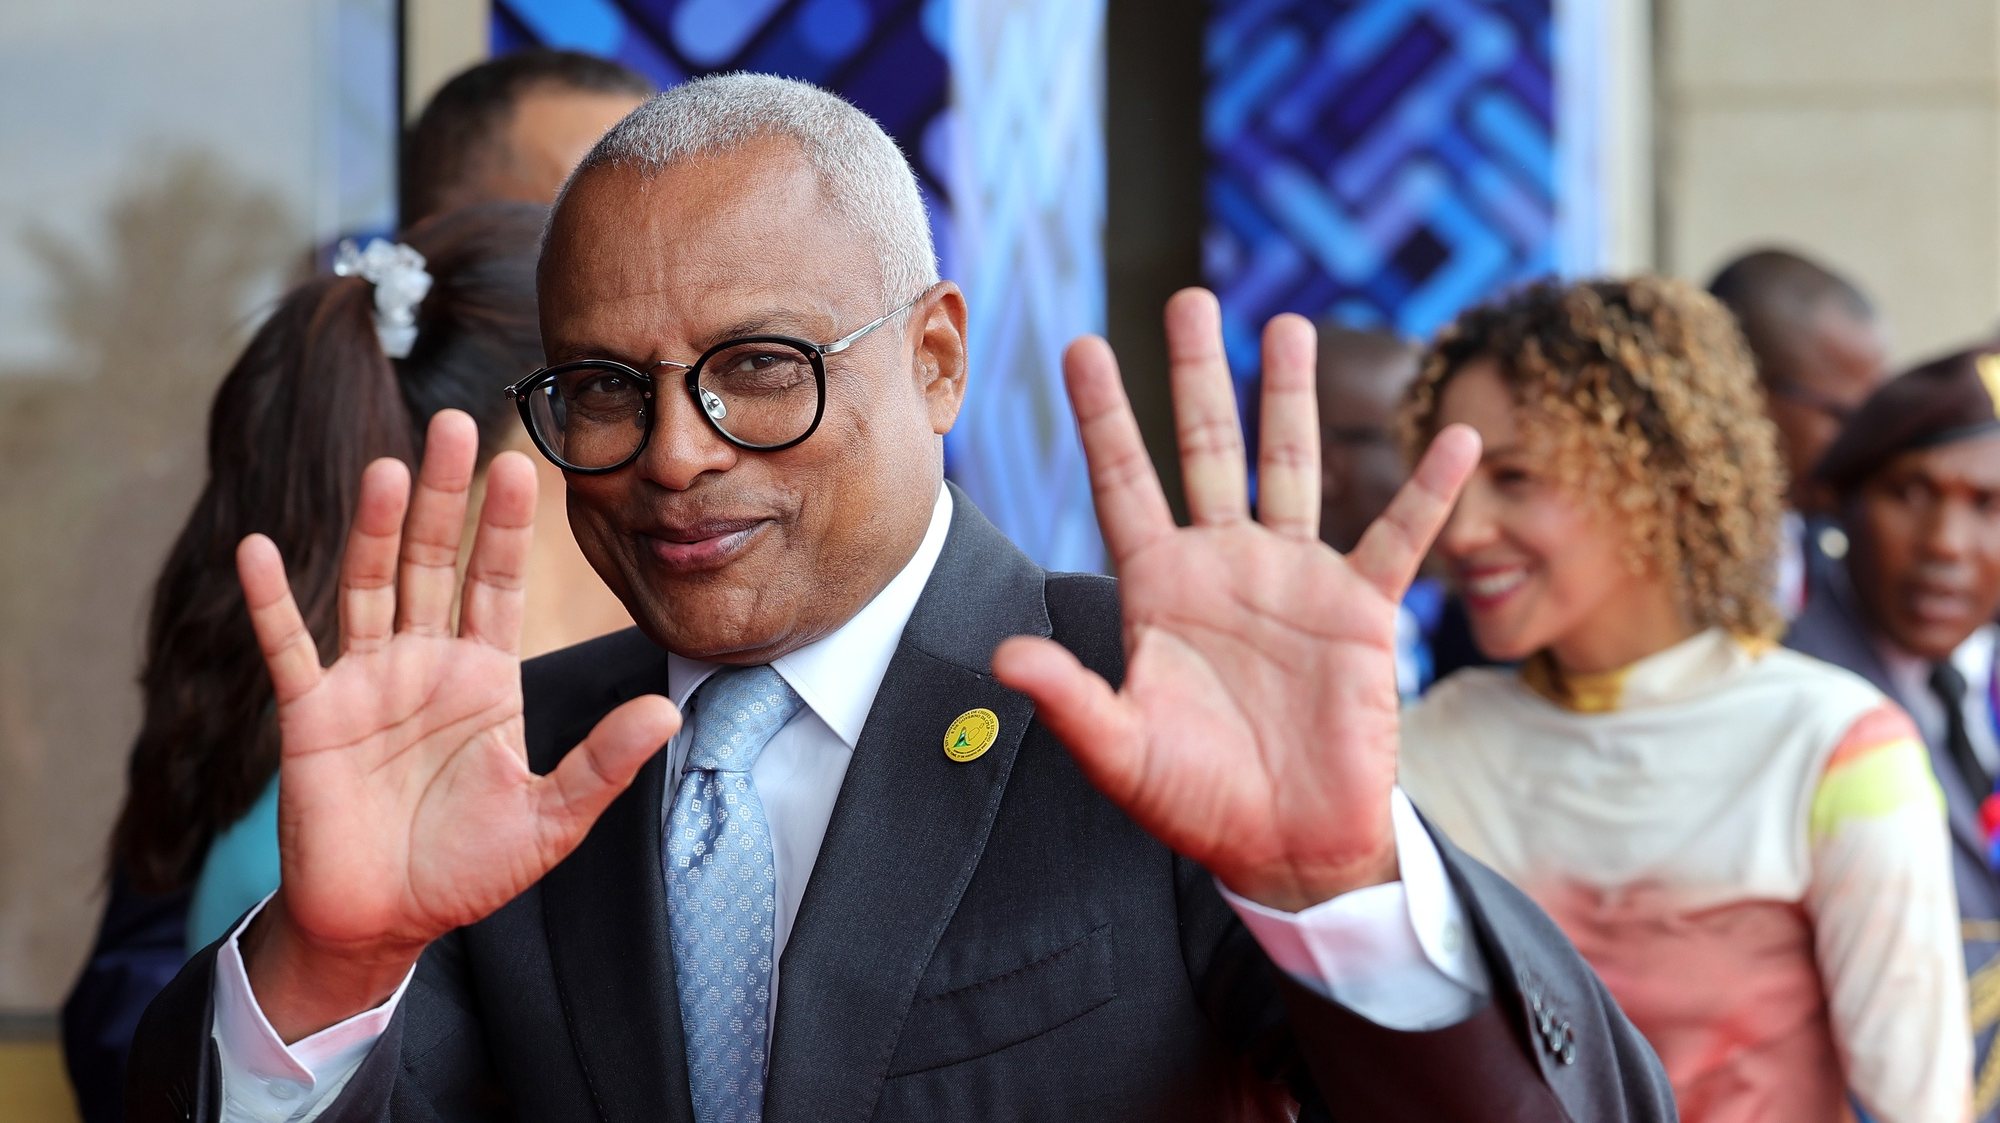 President of the Republic of Cape Verde José Maria Neves waves at  the arrival of XIV CPLP Conference in Sao Tome and Principe, 27th August 2023. The CPLP, which includes Angola, Brazil, Cape Verde, Guinea-Bissau, Equatorial Guinea, Mozambique, Portugal, São Tomé and Príncipe and Timor-Leste, holds the 14th Conference of Heads of State and Government, in São Tomé and Príncipe, under the motto &quot;Youth and Sustainability&quot;. ESTELA SILVA/LUSA